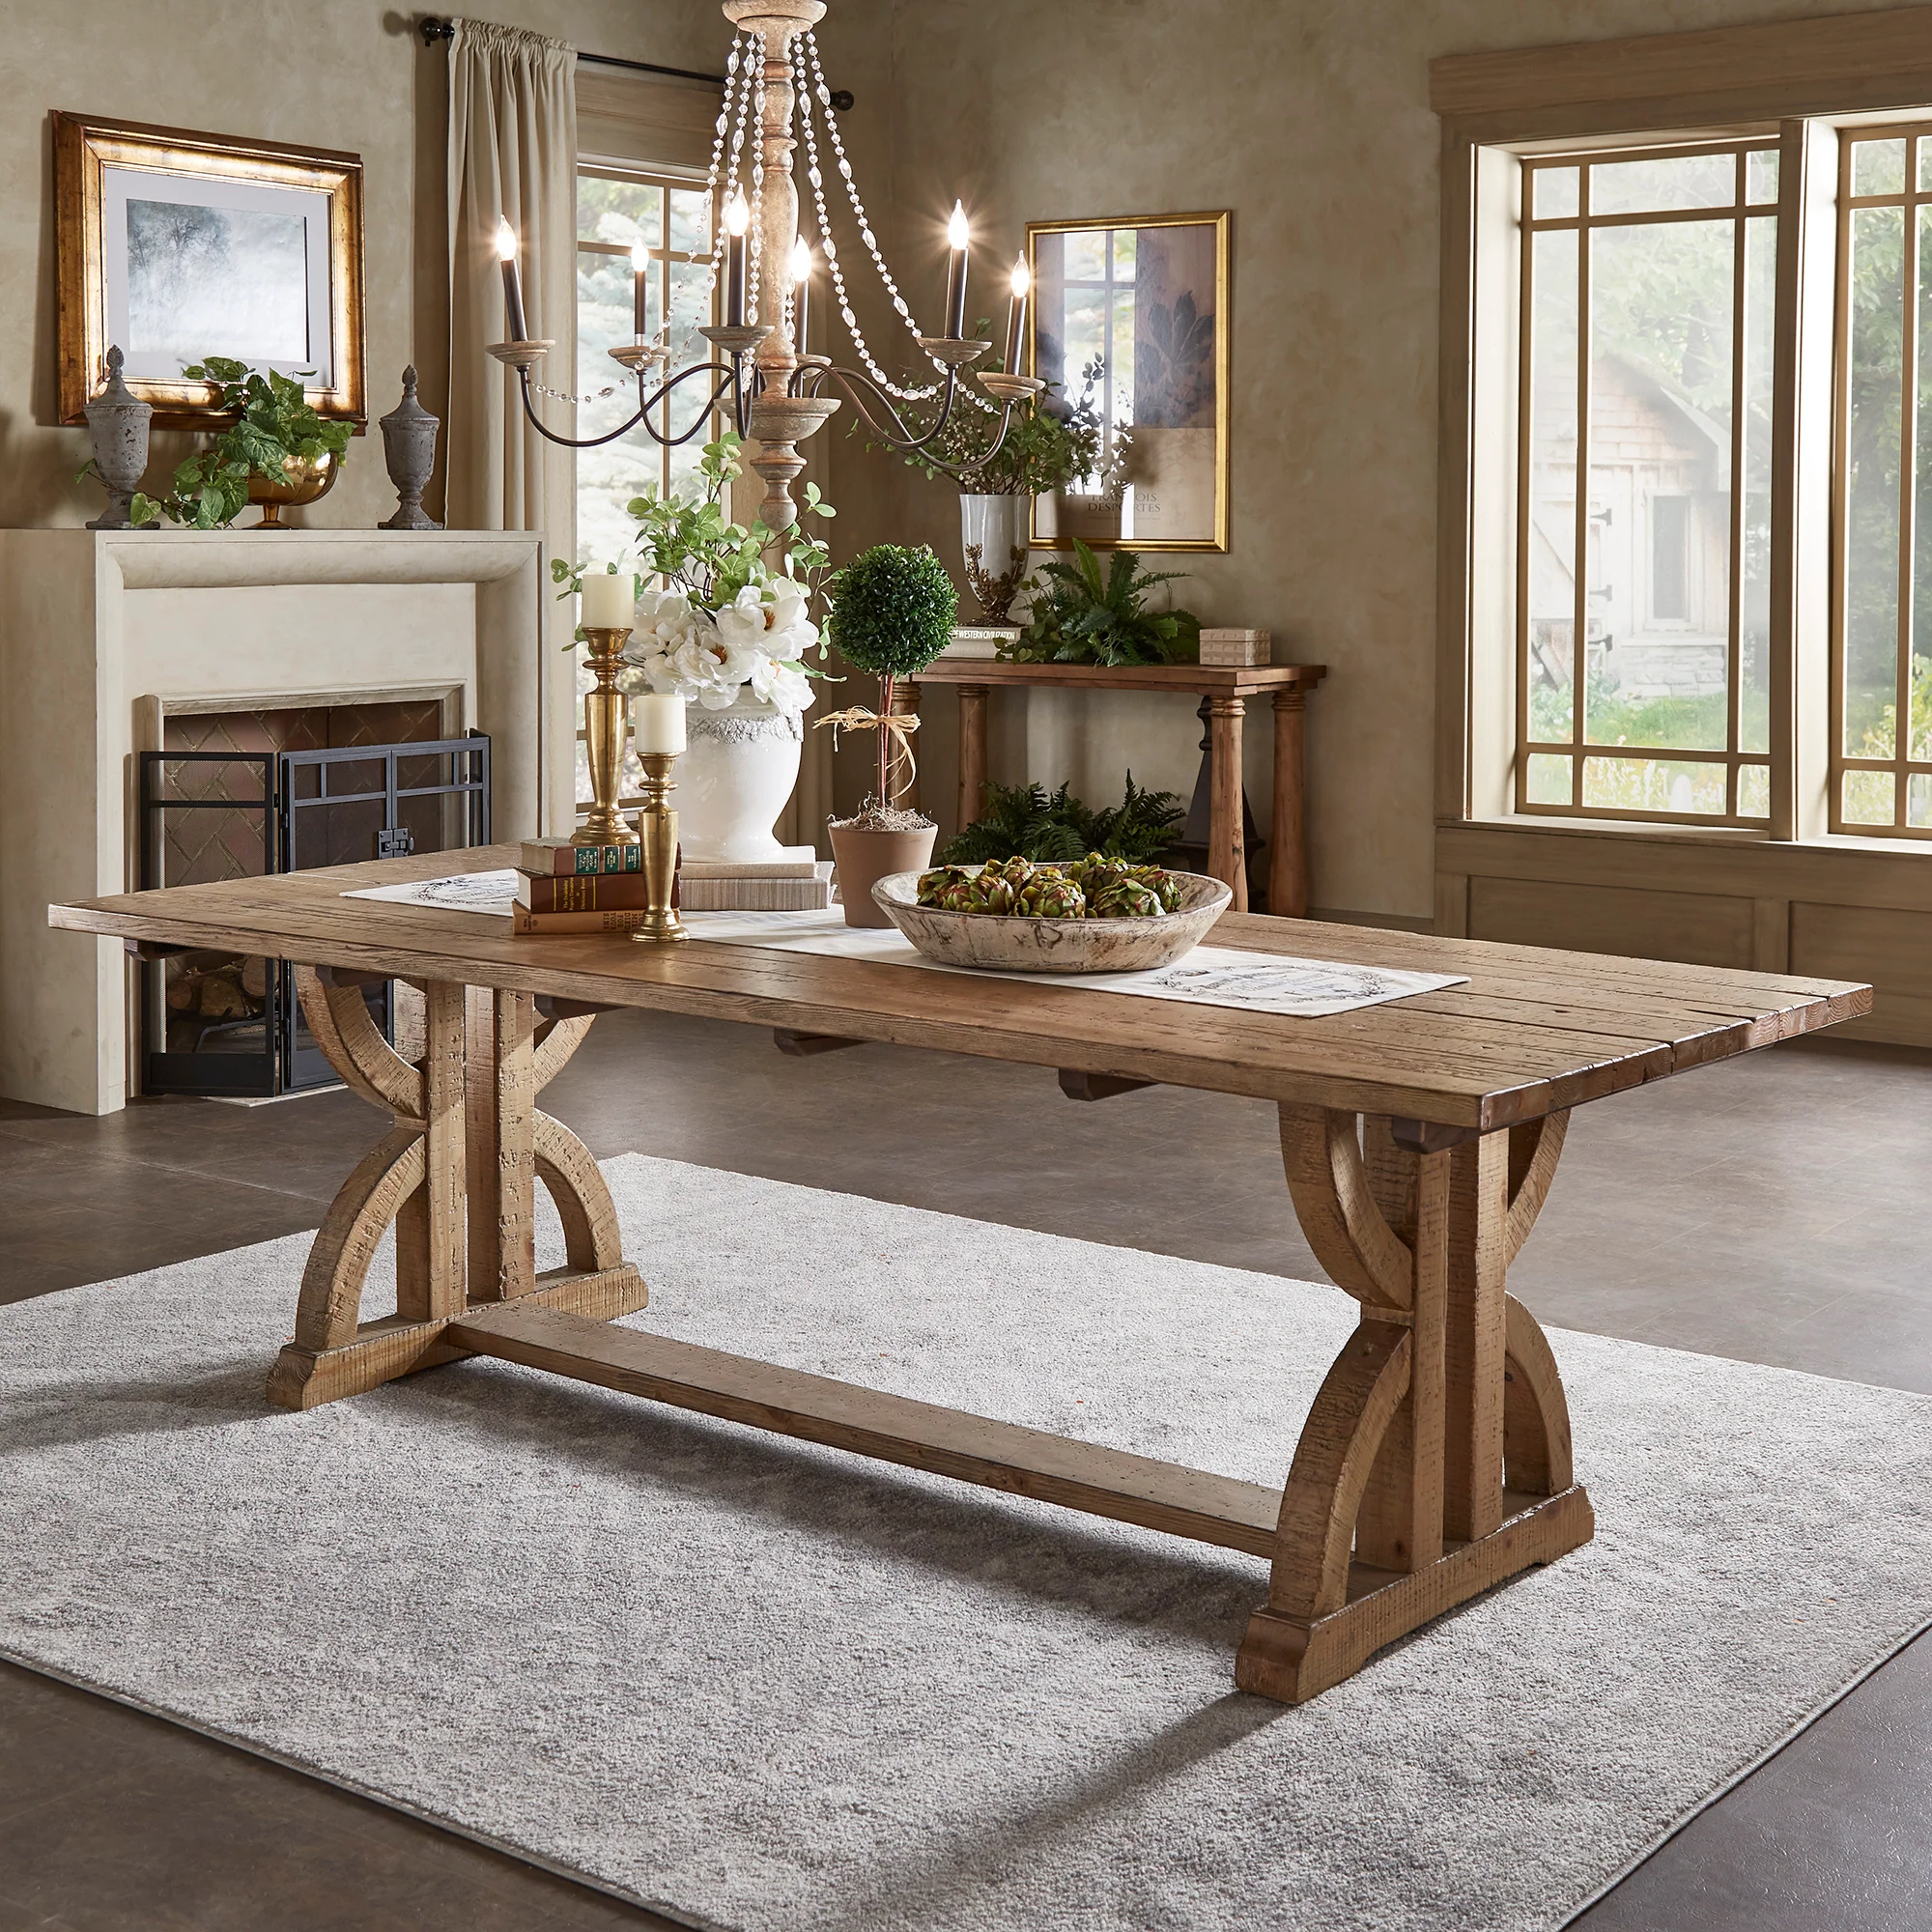 How to Decorate Wood Dining Table